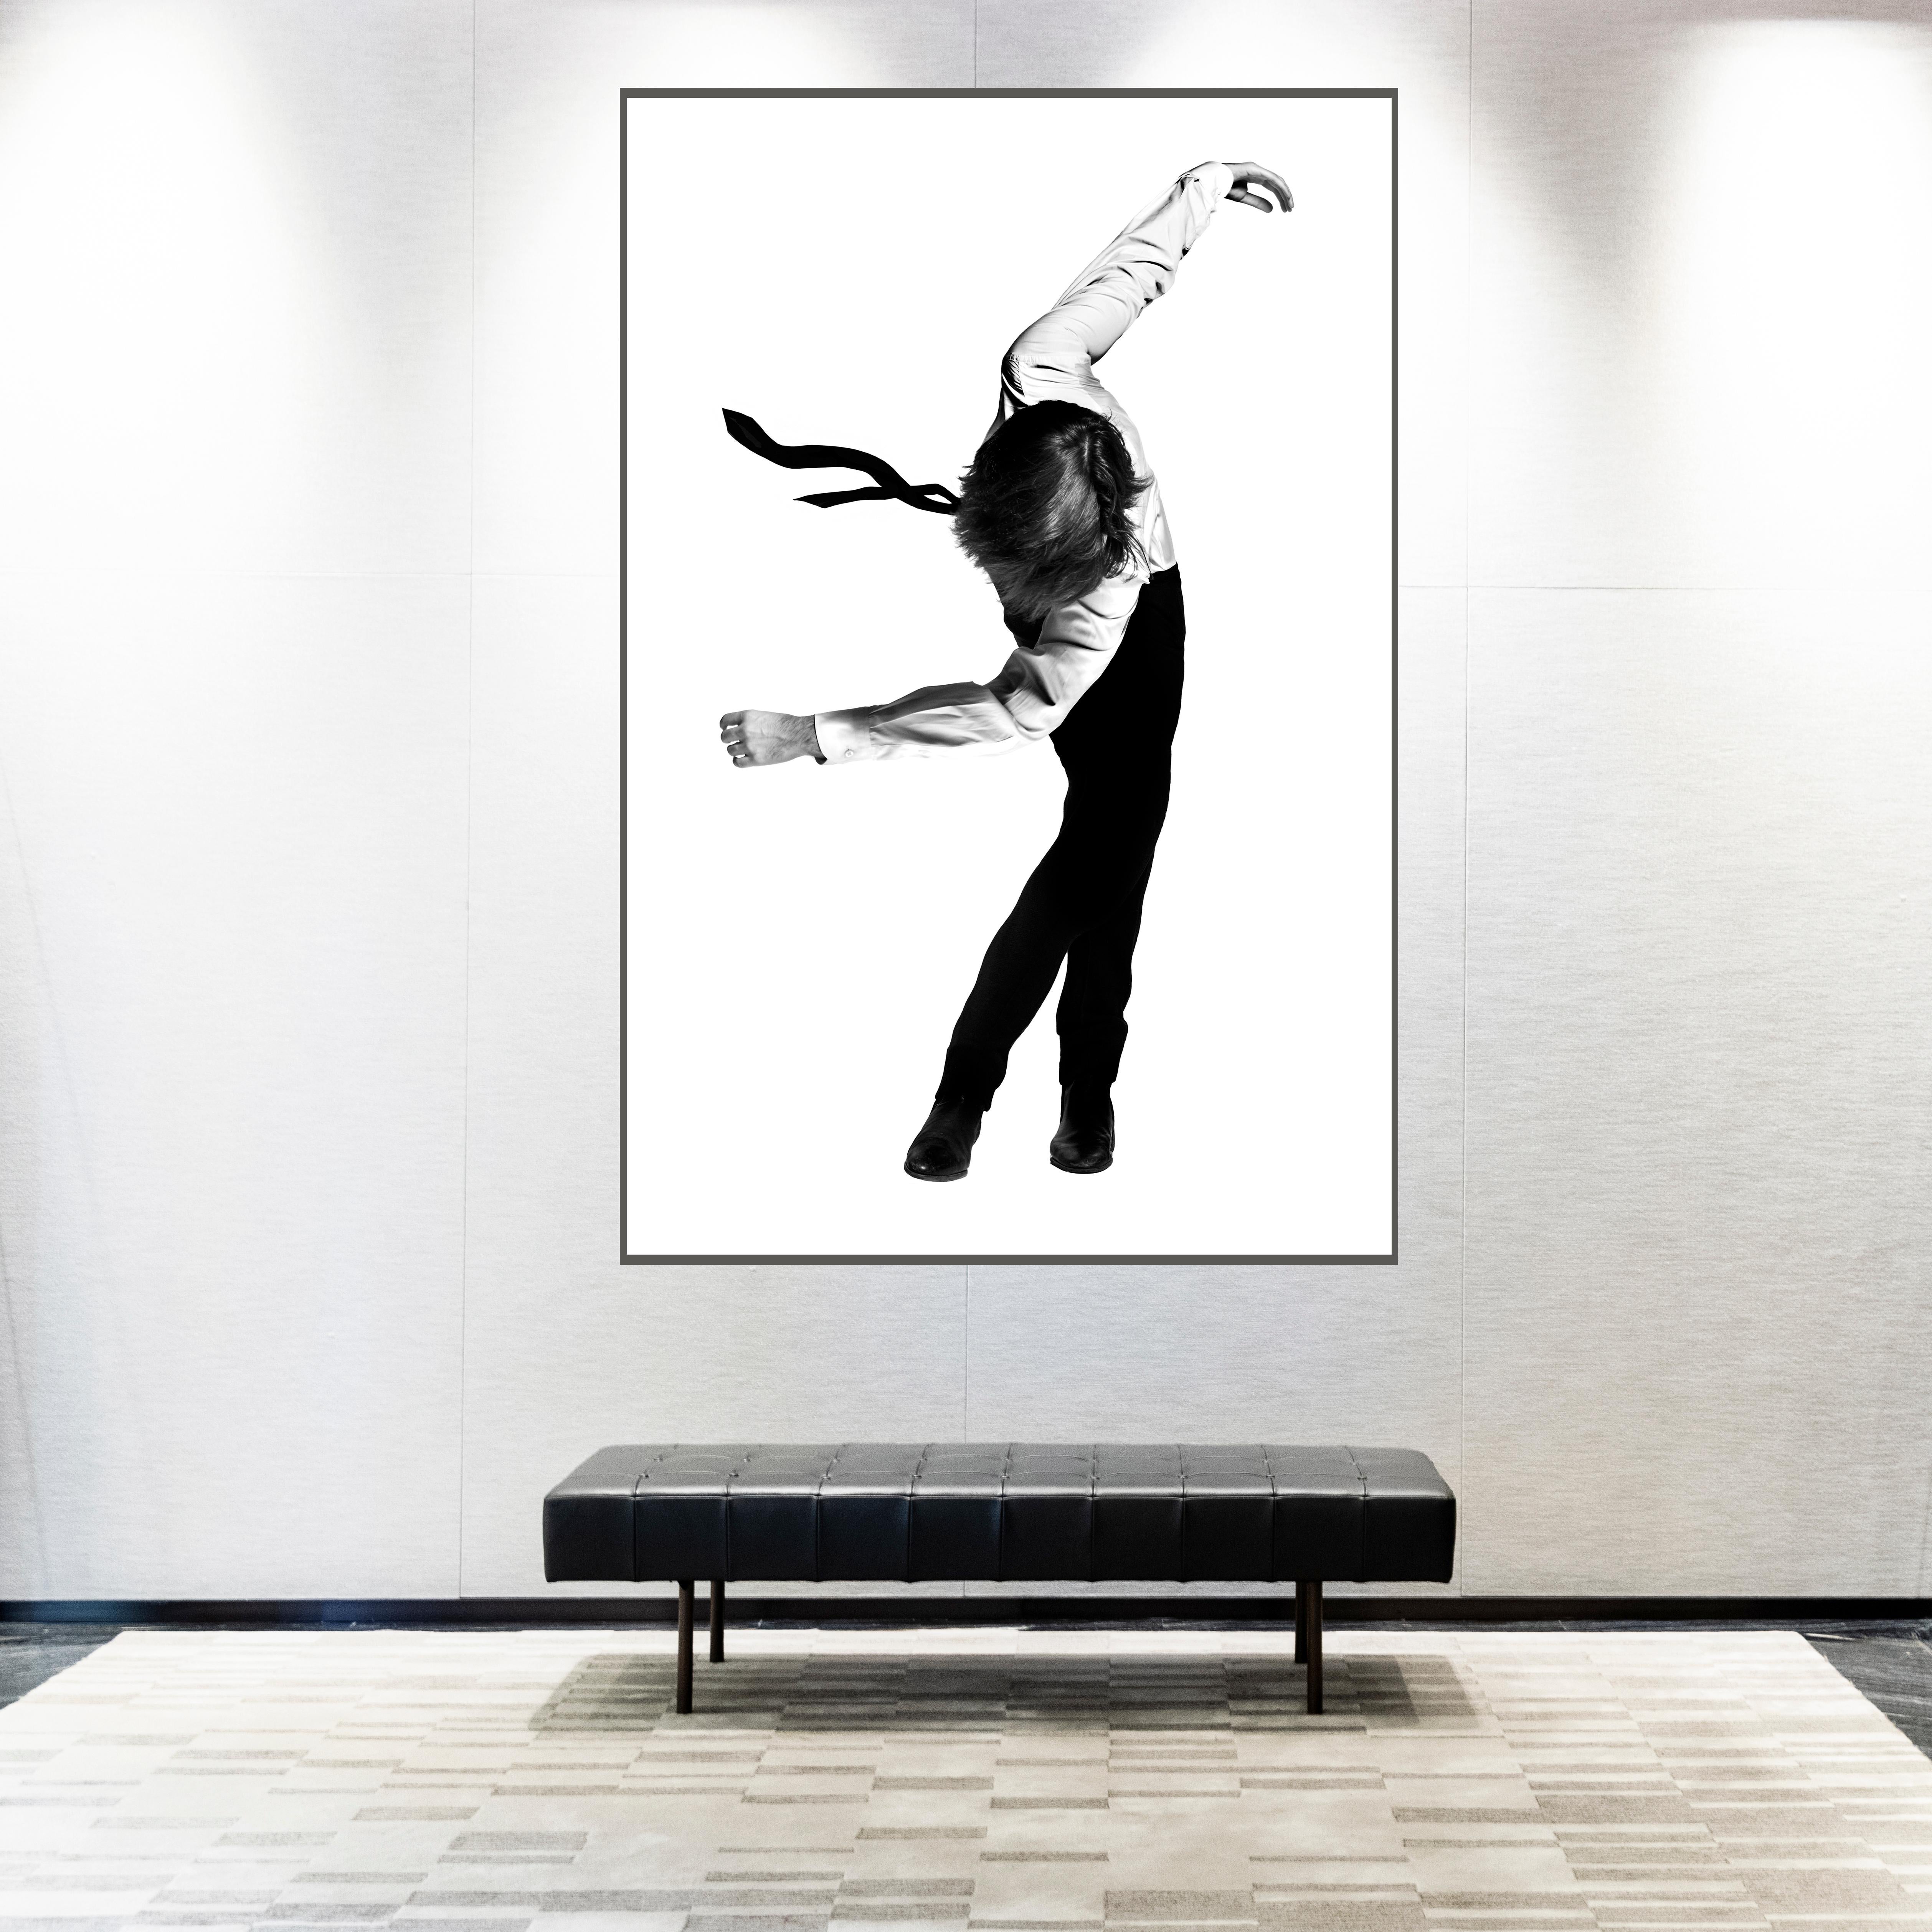 Tribute to Robert Longo, 3 70 in x 47 in (Black and White) - Contemporary Photograph by Nacho Pinedo